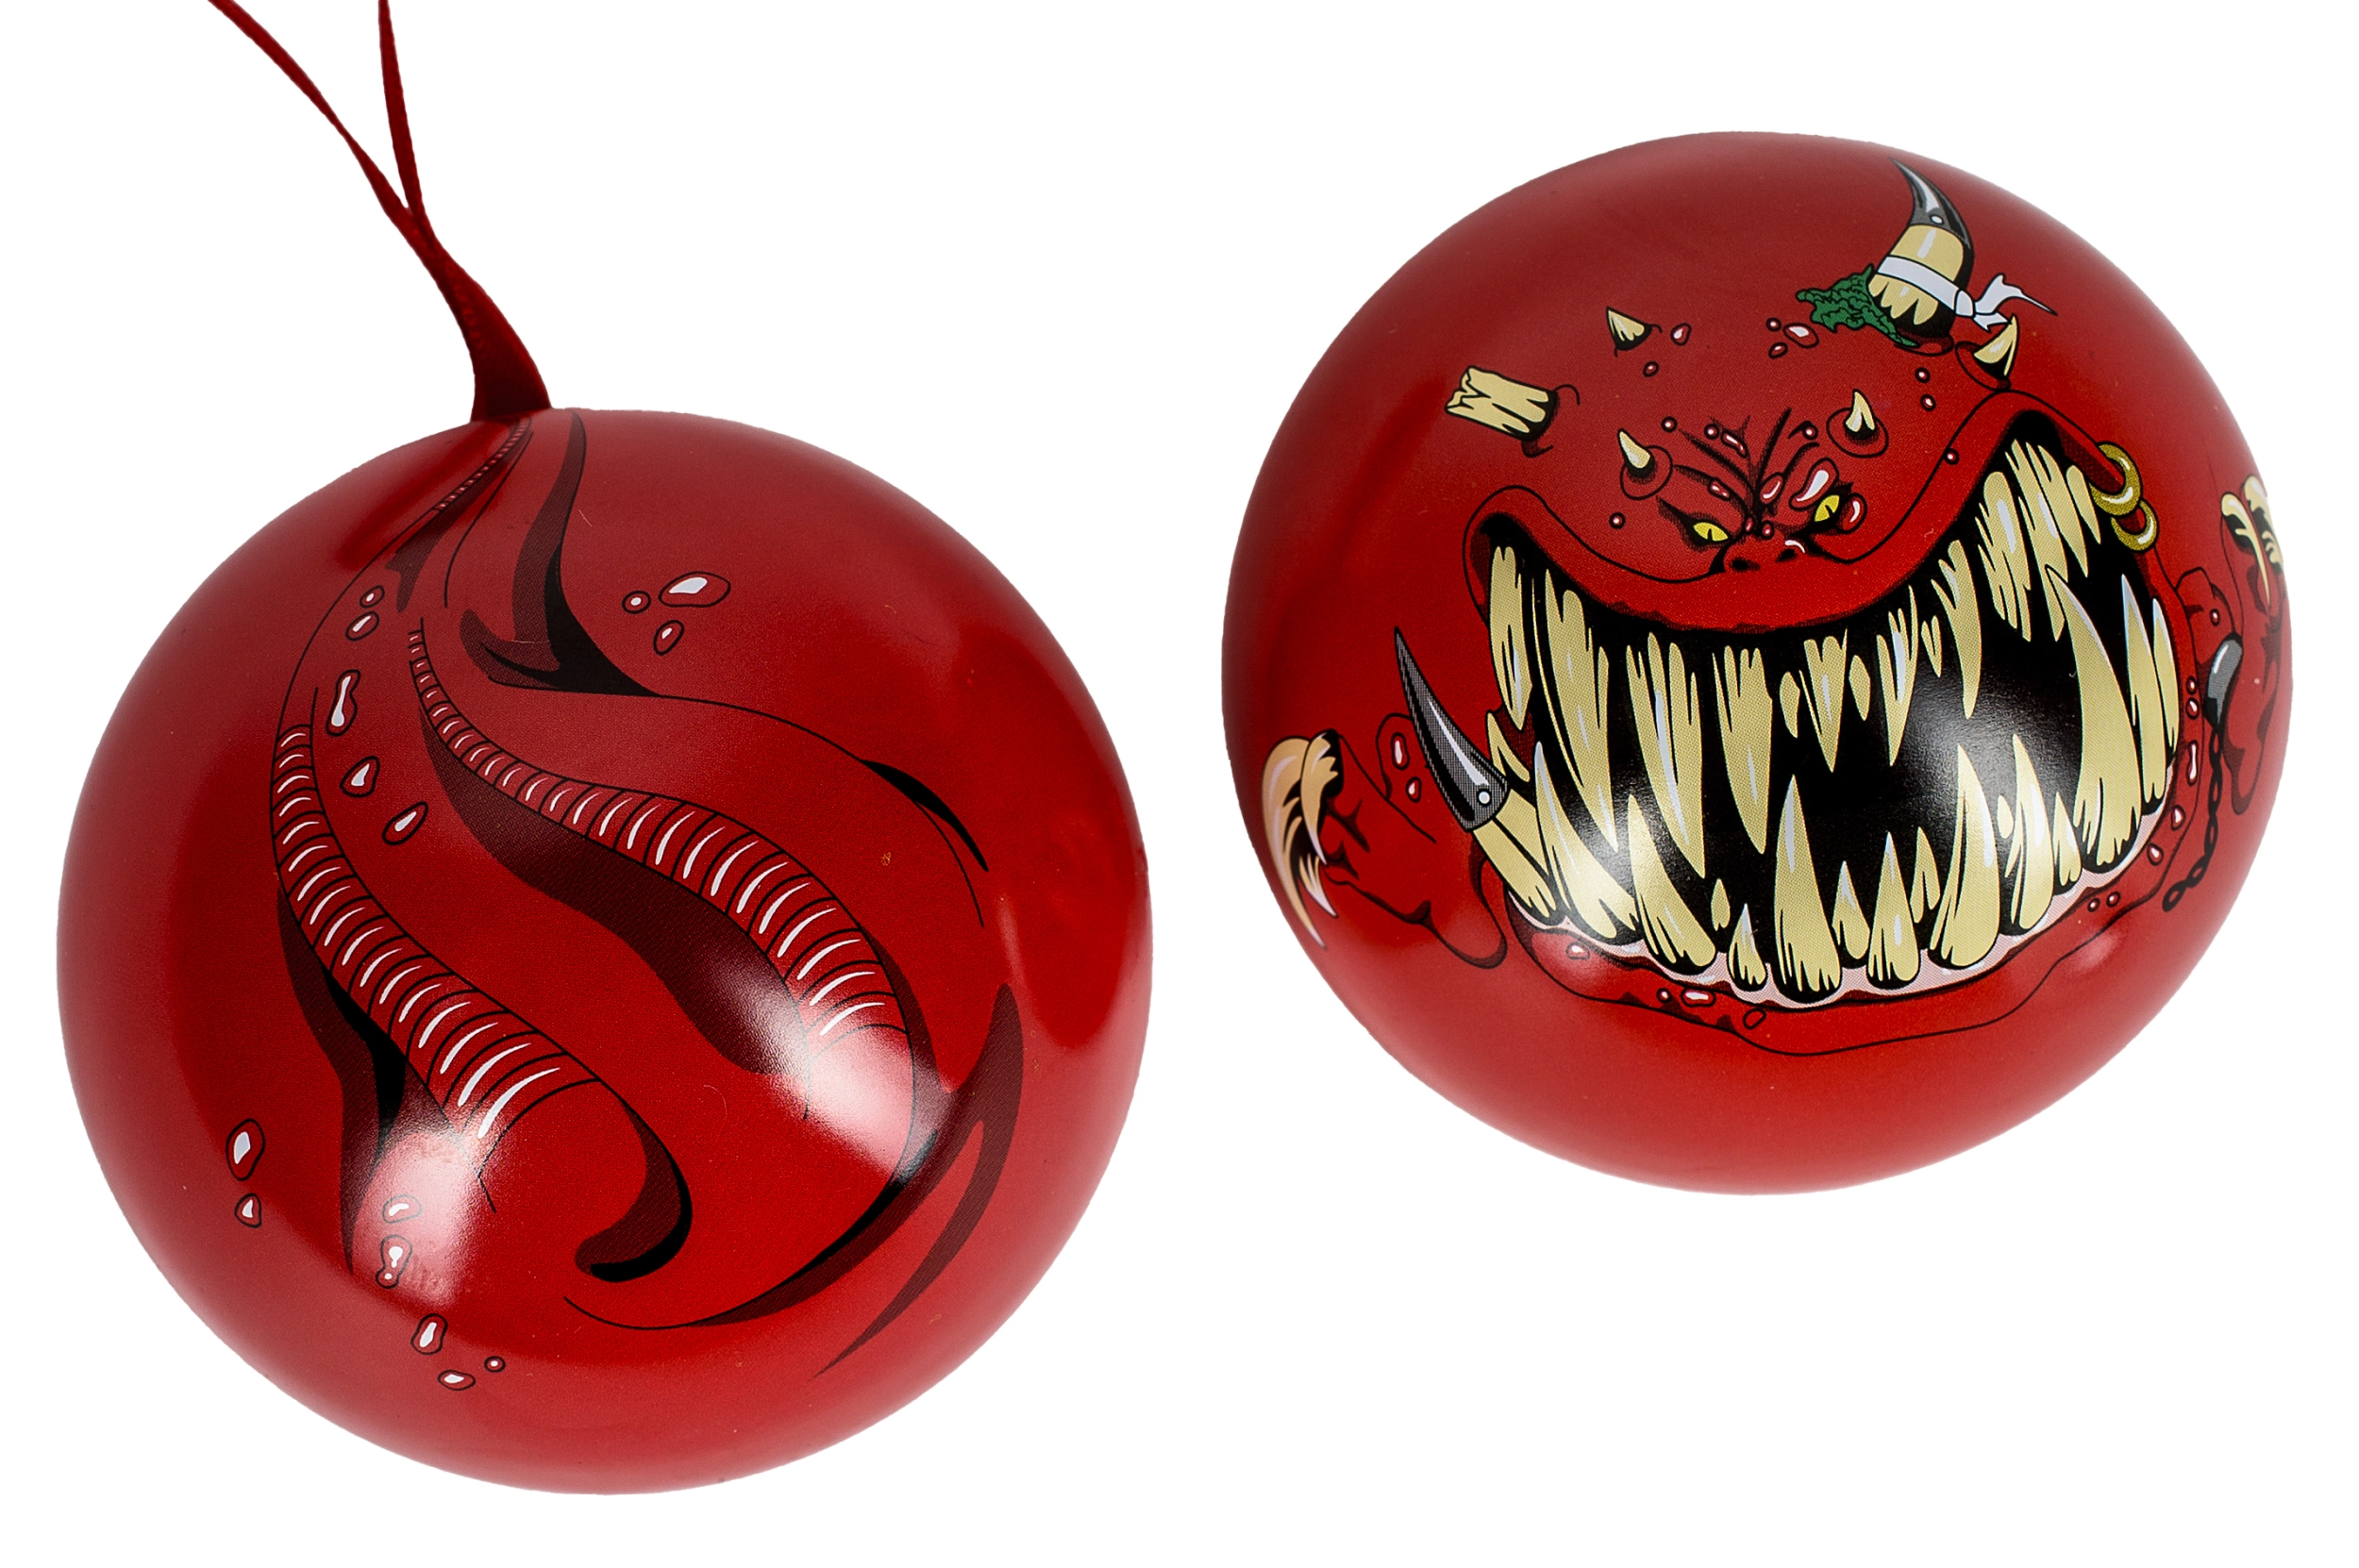 Warhammer_Red_Squig_Bauble_New_3_1699541583